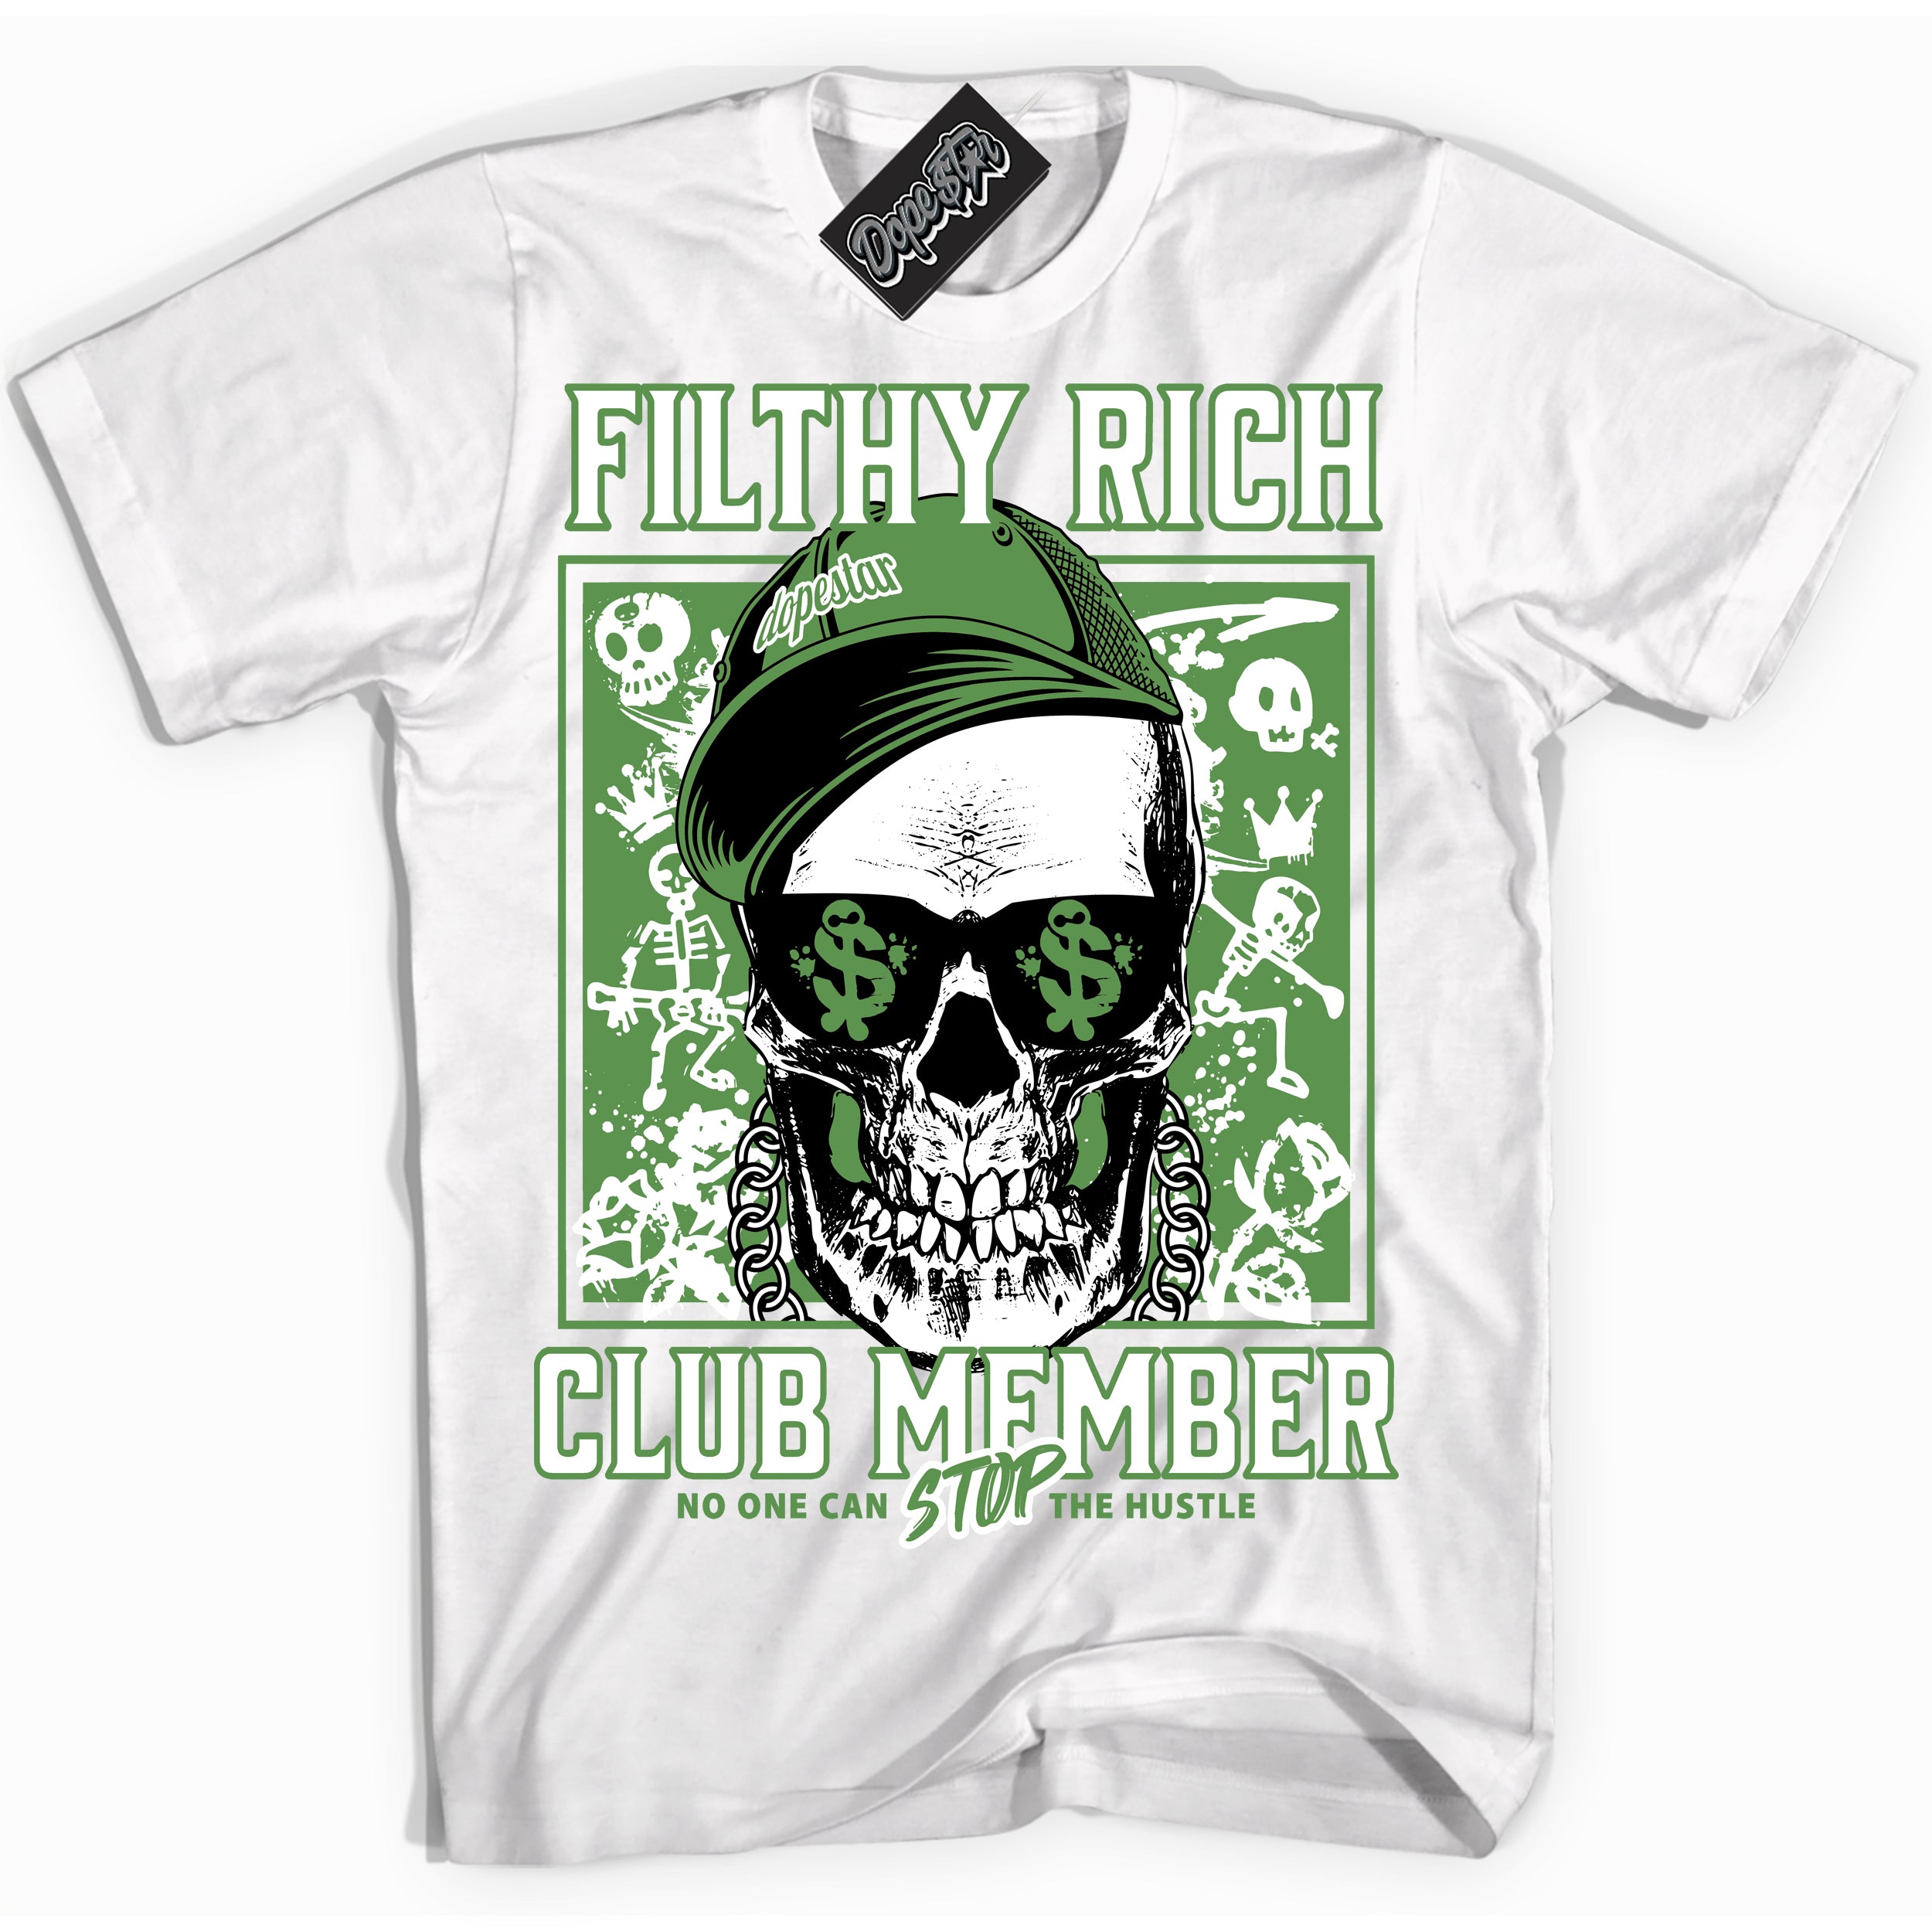 Cool White Shirt with “ Filthy Rich” design that perfectly matches Chlorophyll 1s Sneakers.